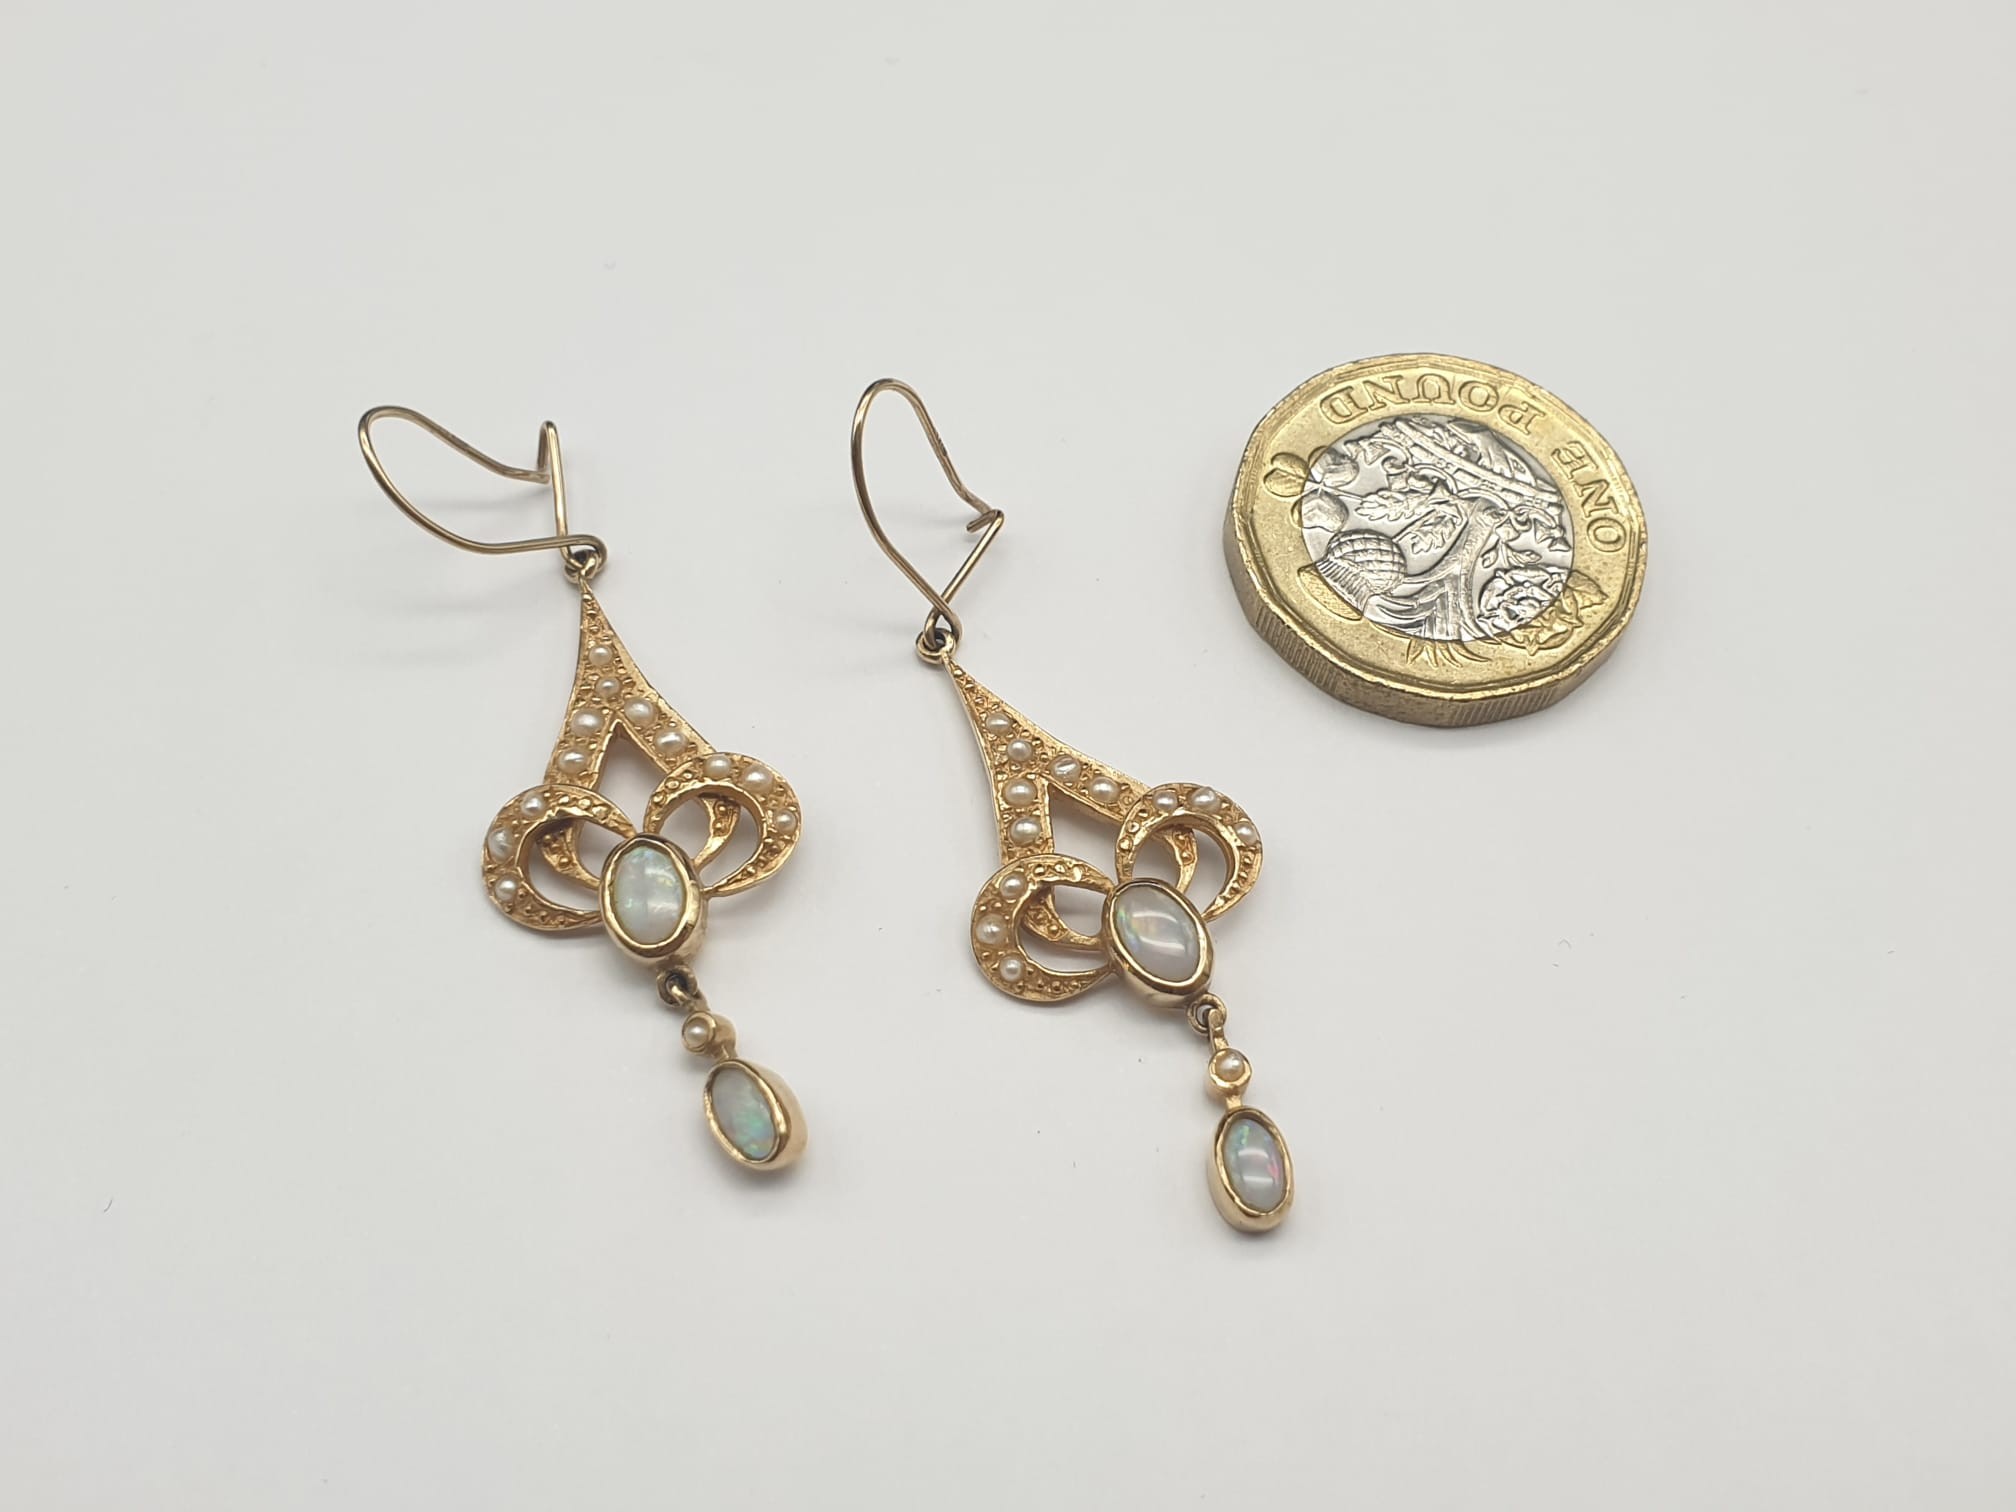 9K Yellow Gold Seed Pearl and Opal Drop Earrings. 3.9g. - Image 4 of 4